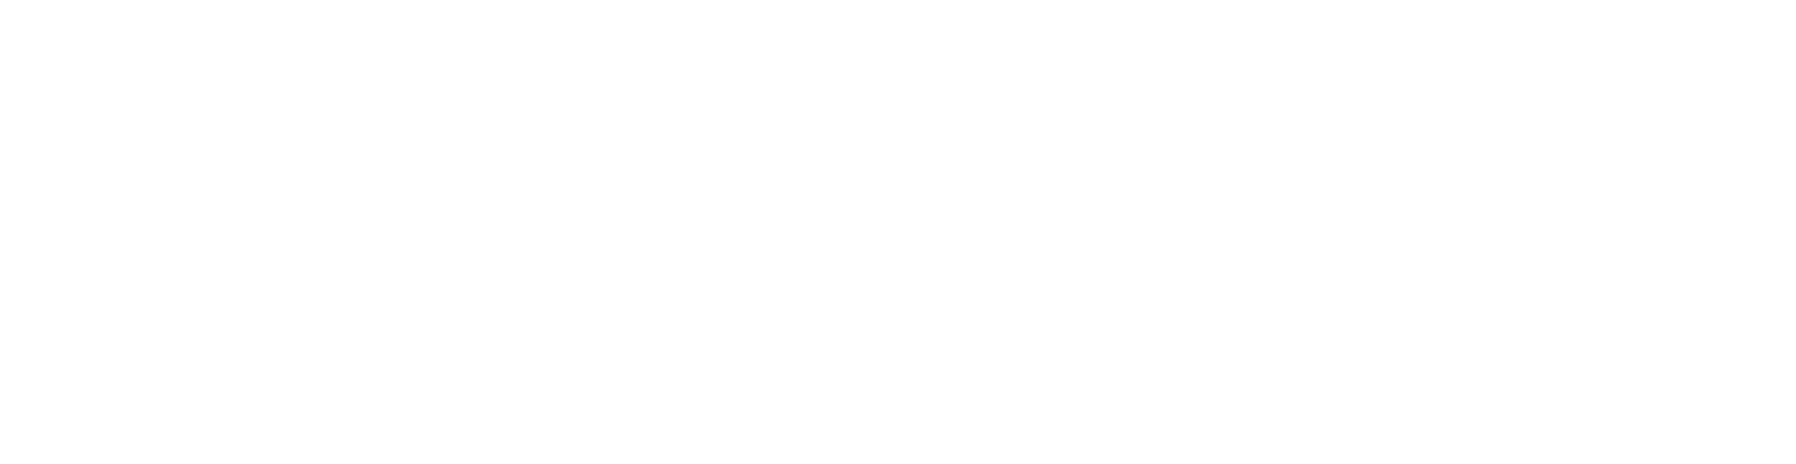 WHITE Leafbulb with _Earth Hacks_ text.png